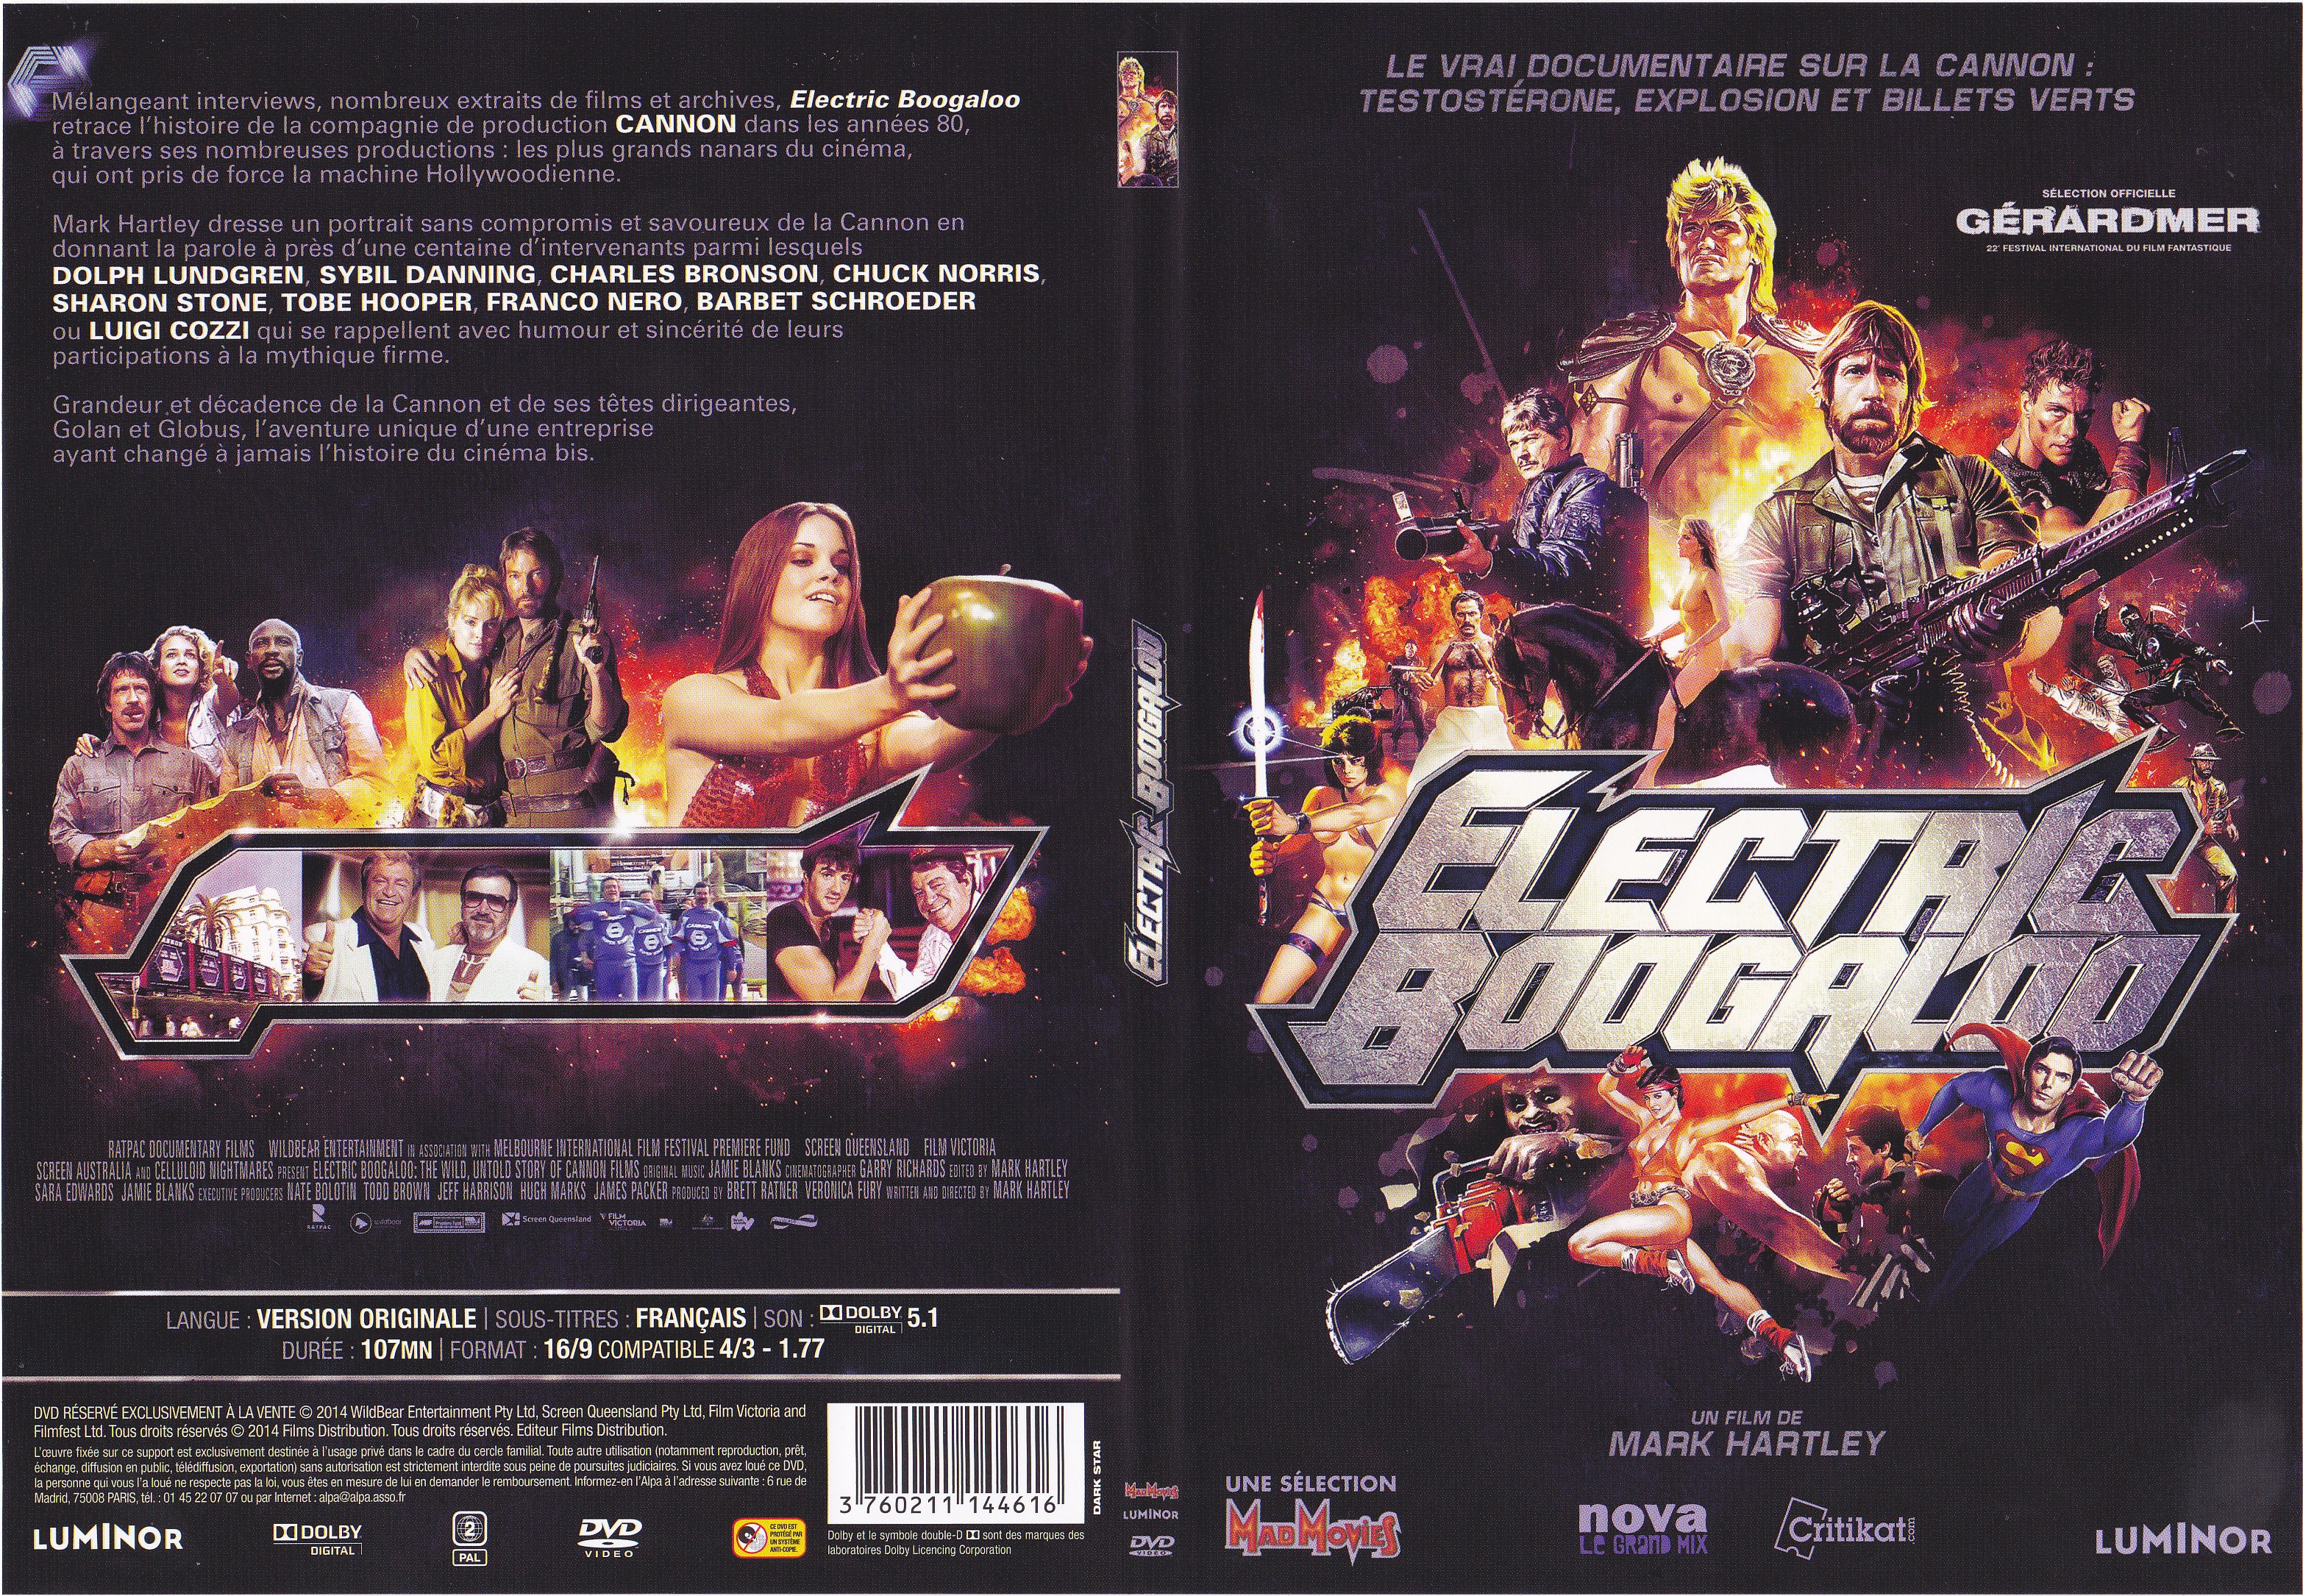 Jaquette DVD Electric Boogaloo